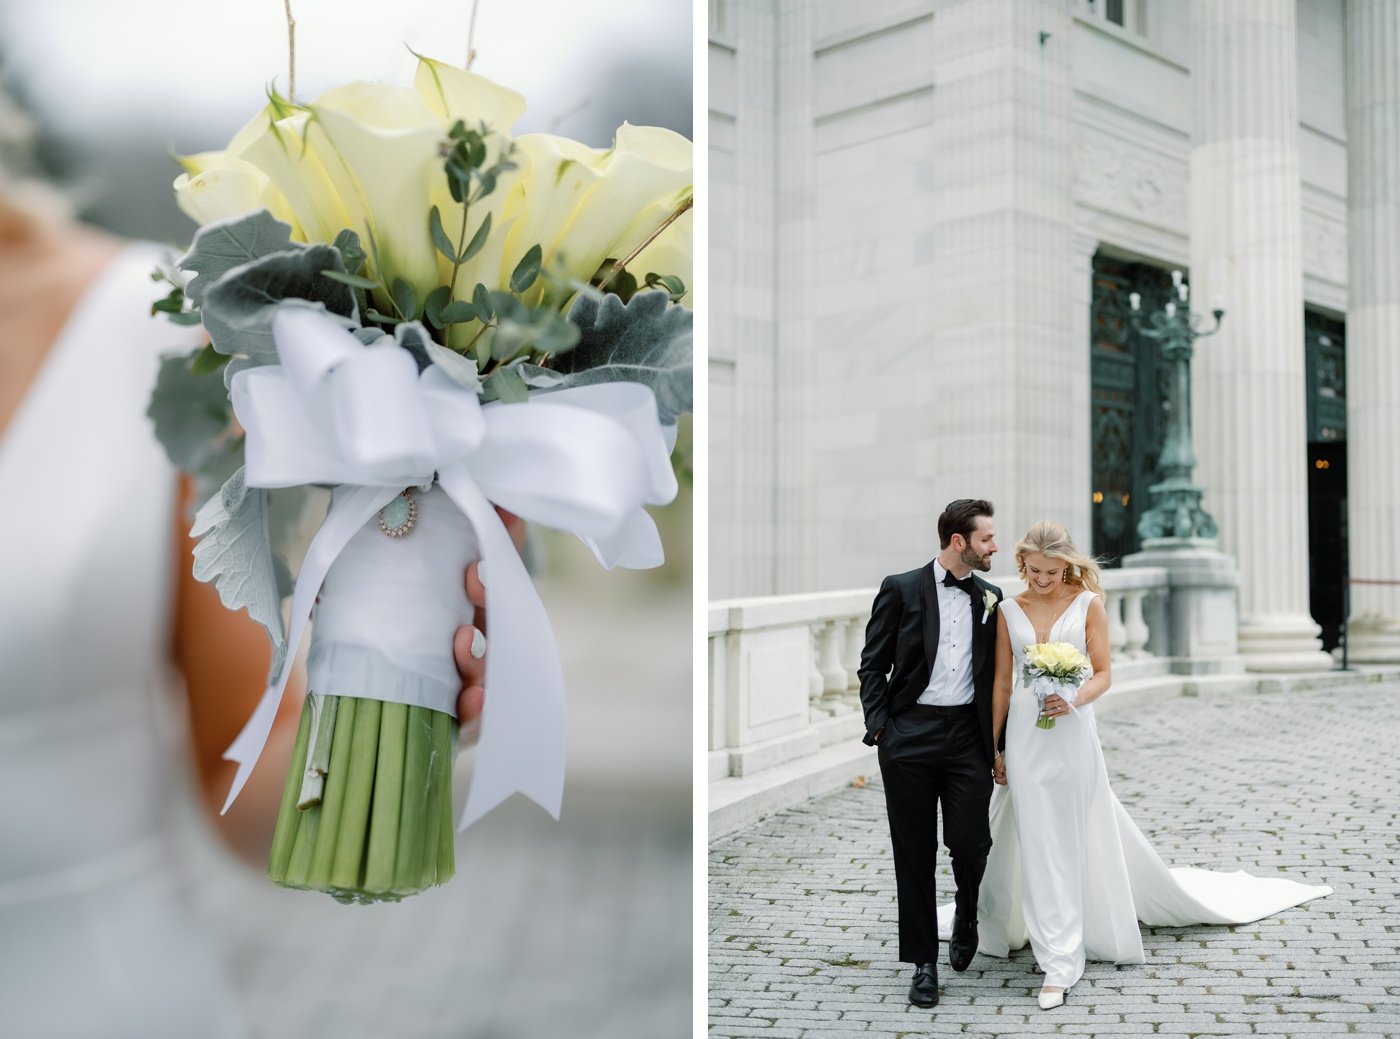 Winter wedding bouquet with calla lilies